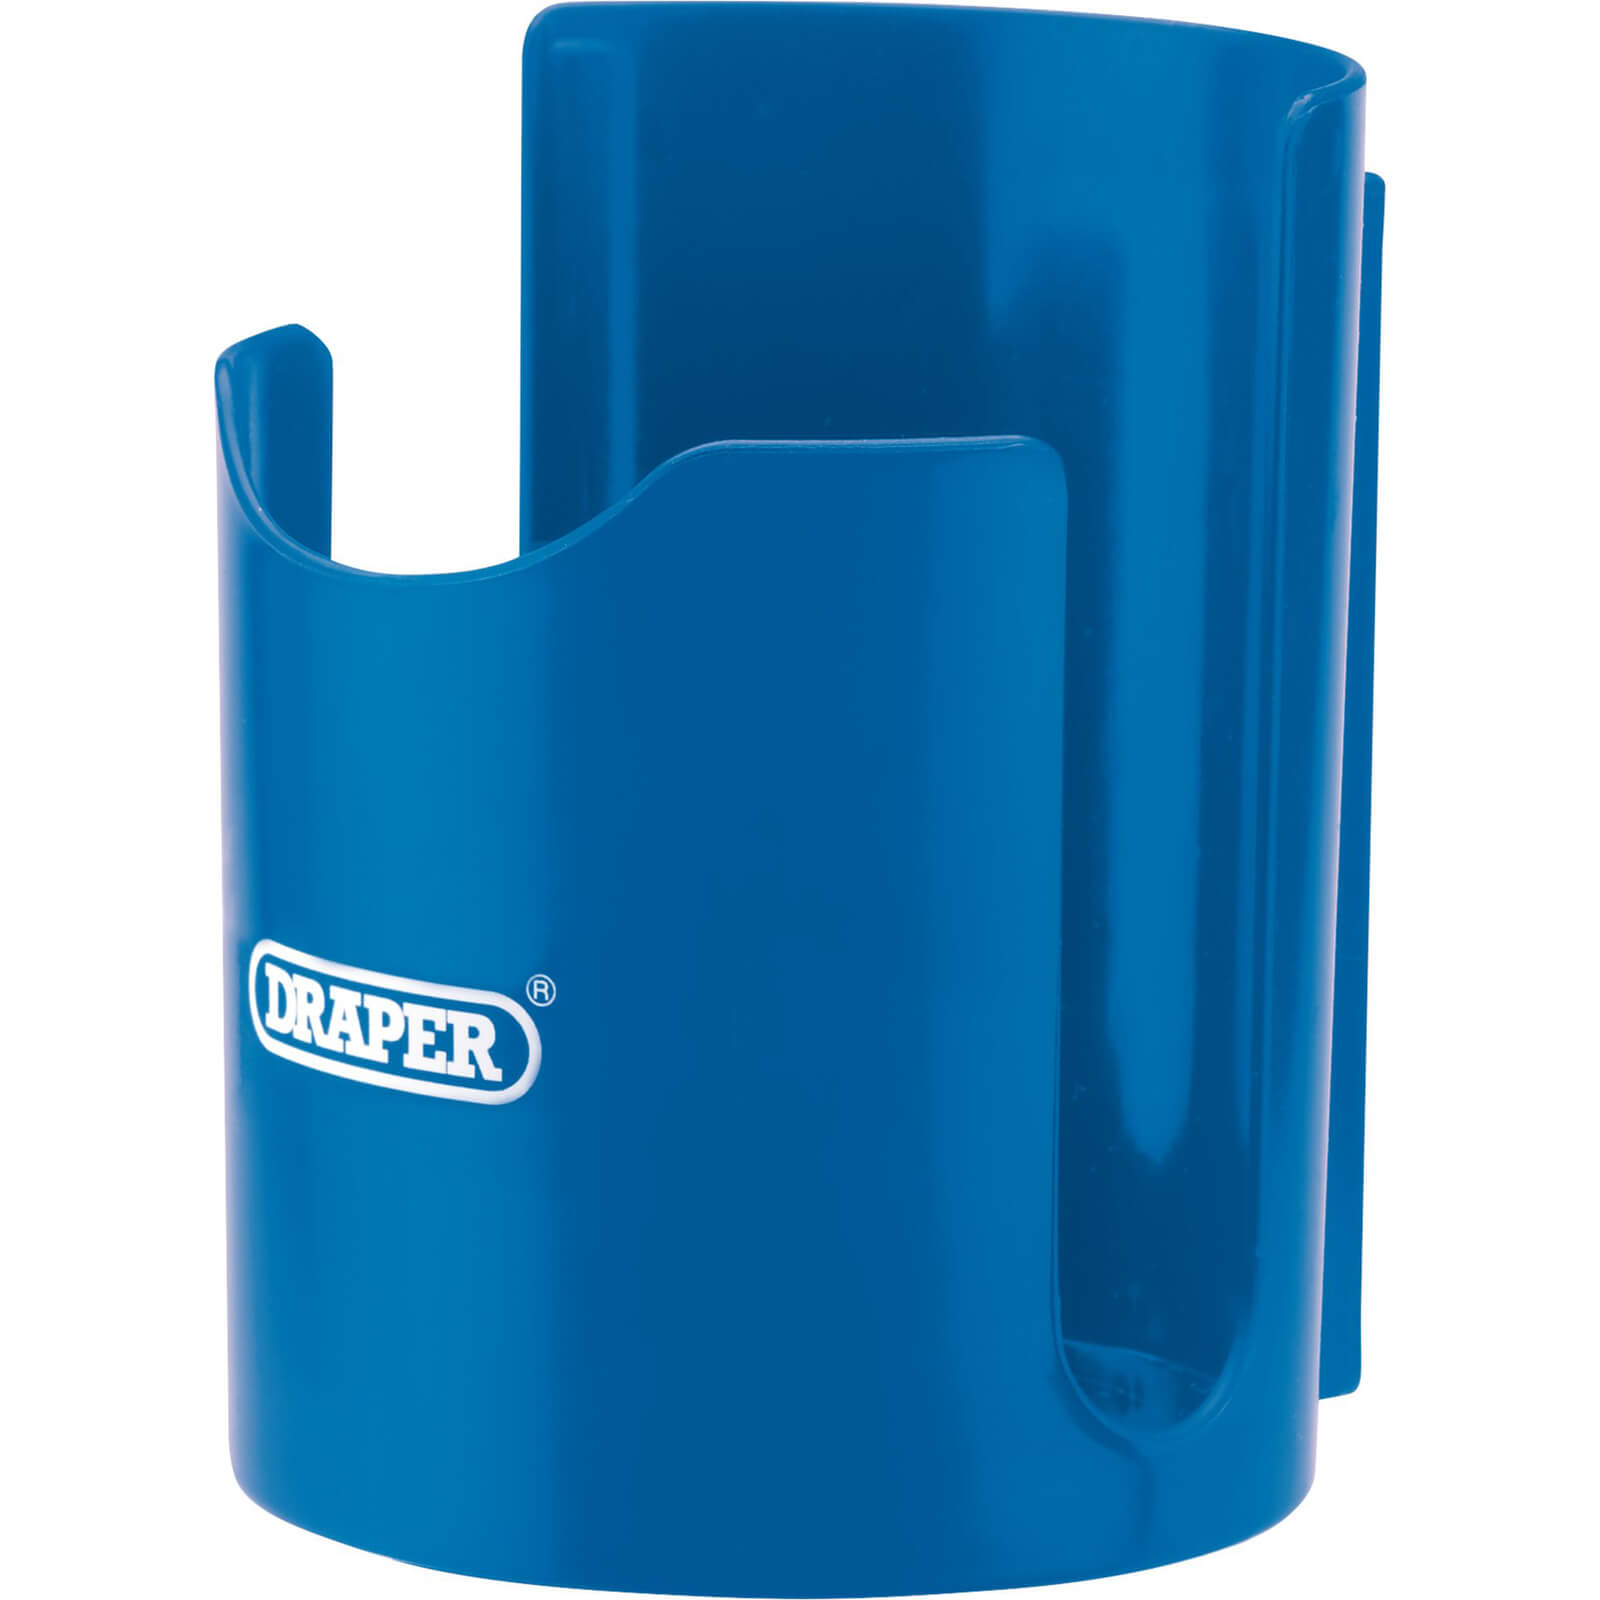 Photo of Draper Magnetic Cup Holder